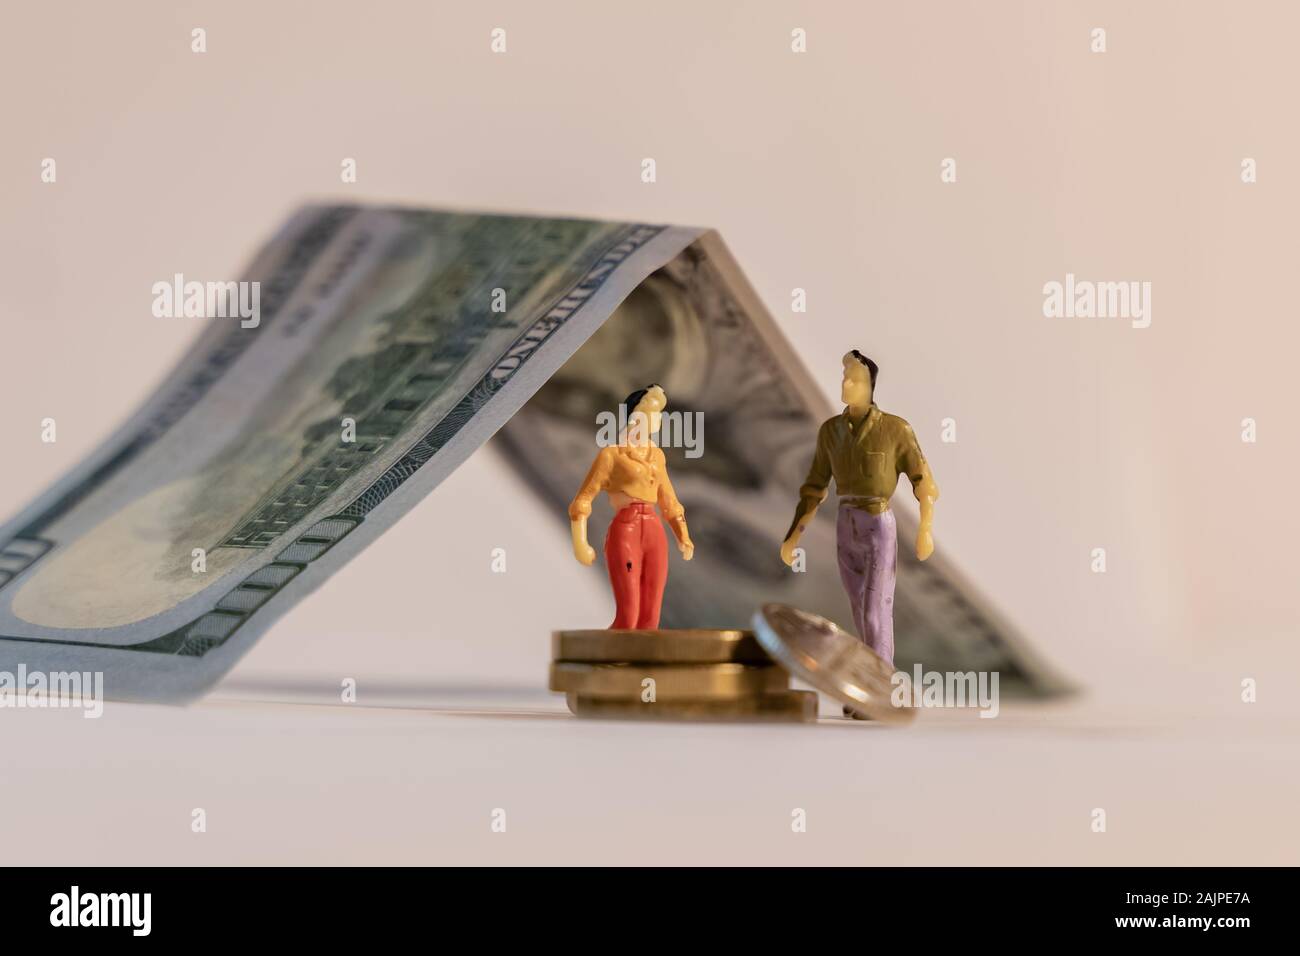 Miniature woman and man figure standing next to house made of dollar bill and counting coins. Shallow depth of field background. Family budget, mortga Stock Photo